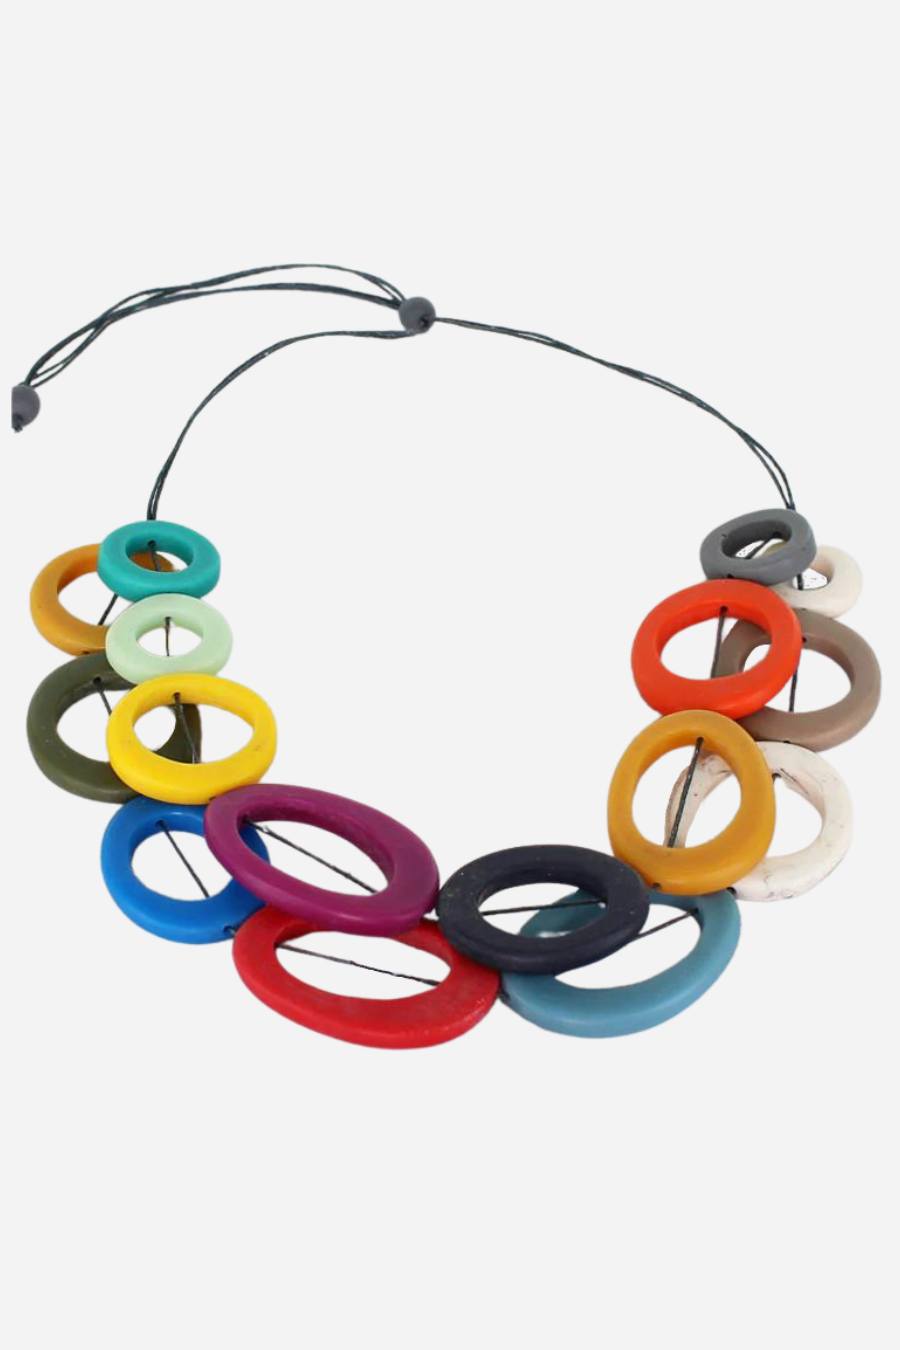 Double Strand Multi Colour Resin Hoop Necklace